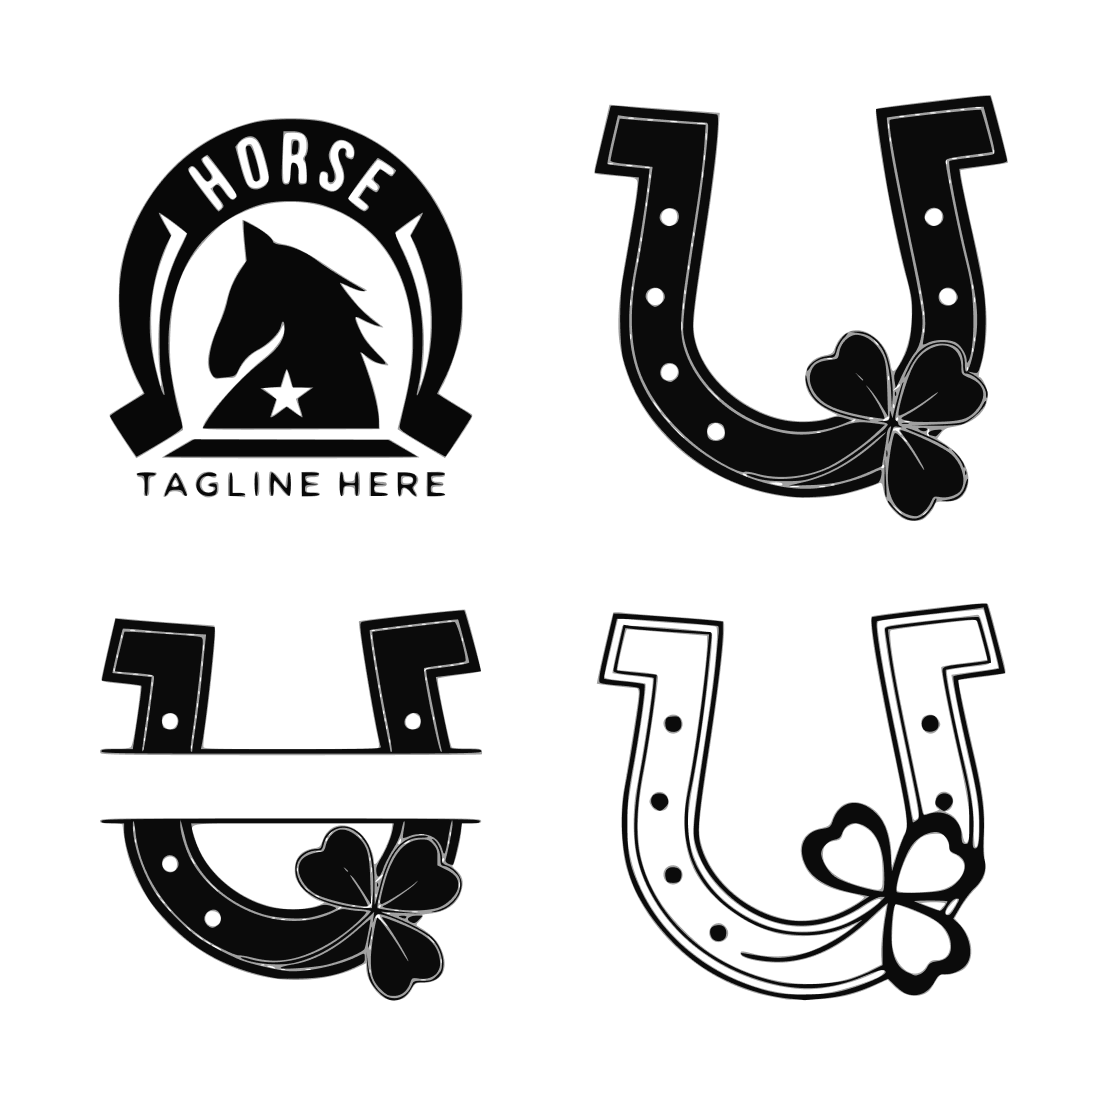 Four different logos for horses and horseshoes.